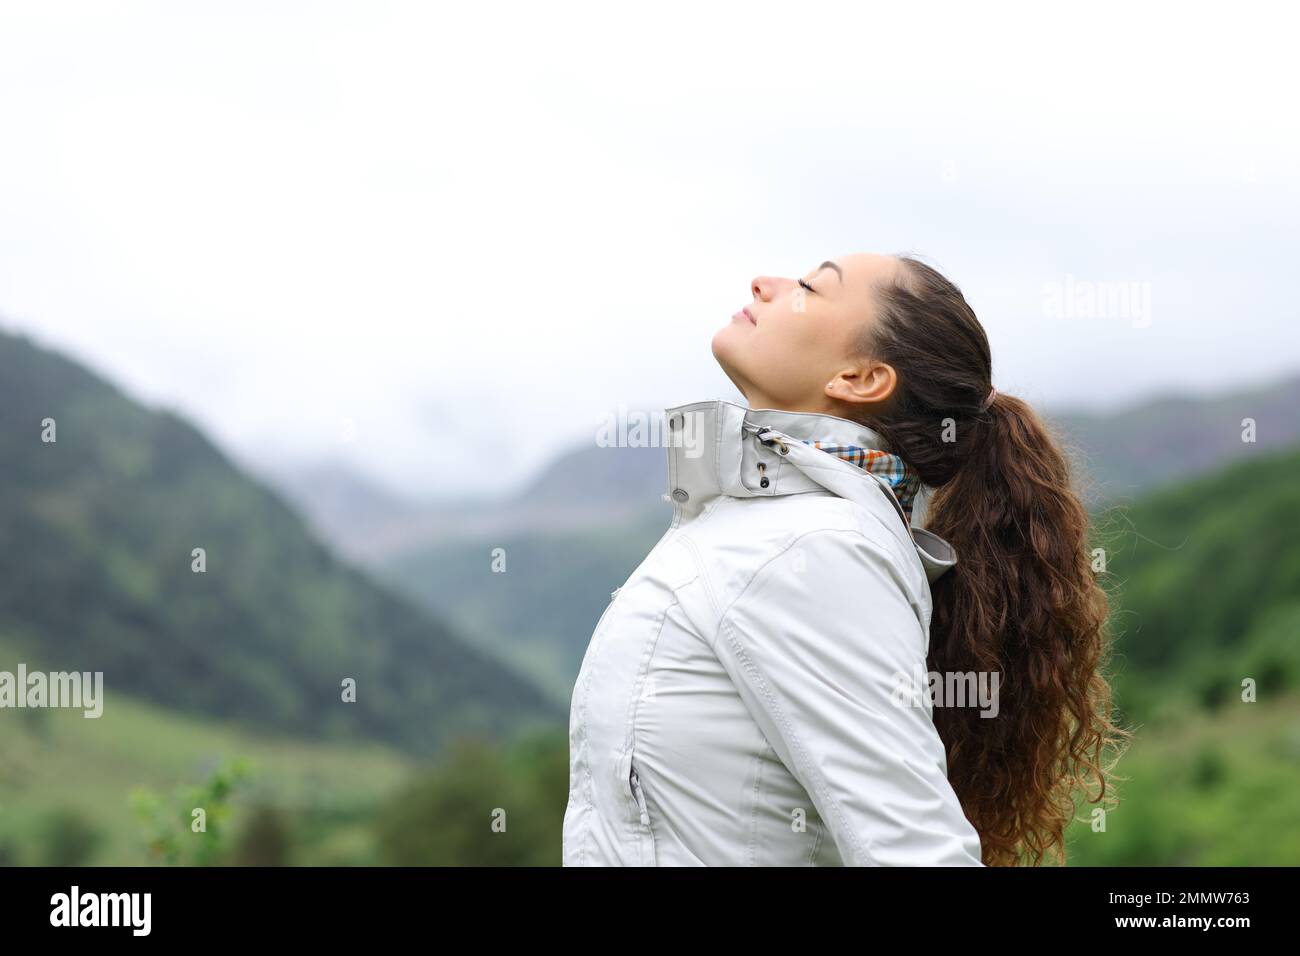 Profile of a hiker breathing fresh air in nature Stock Photo